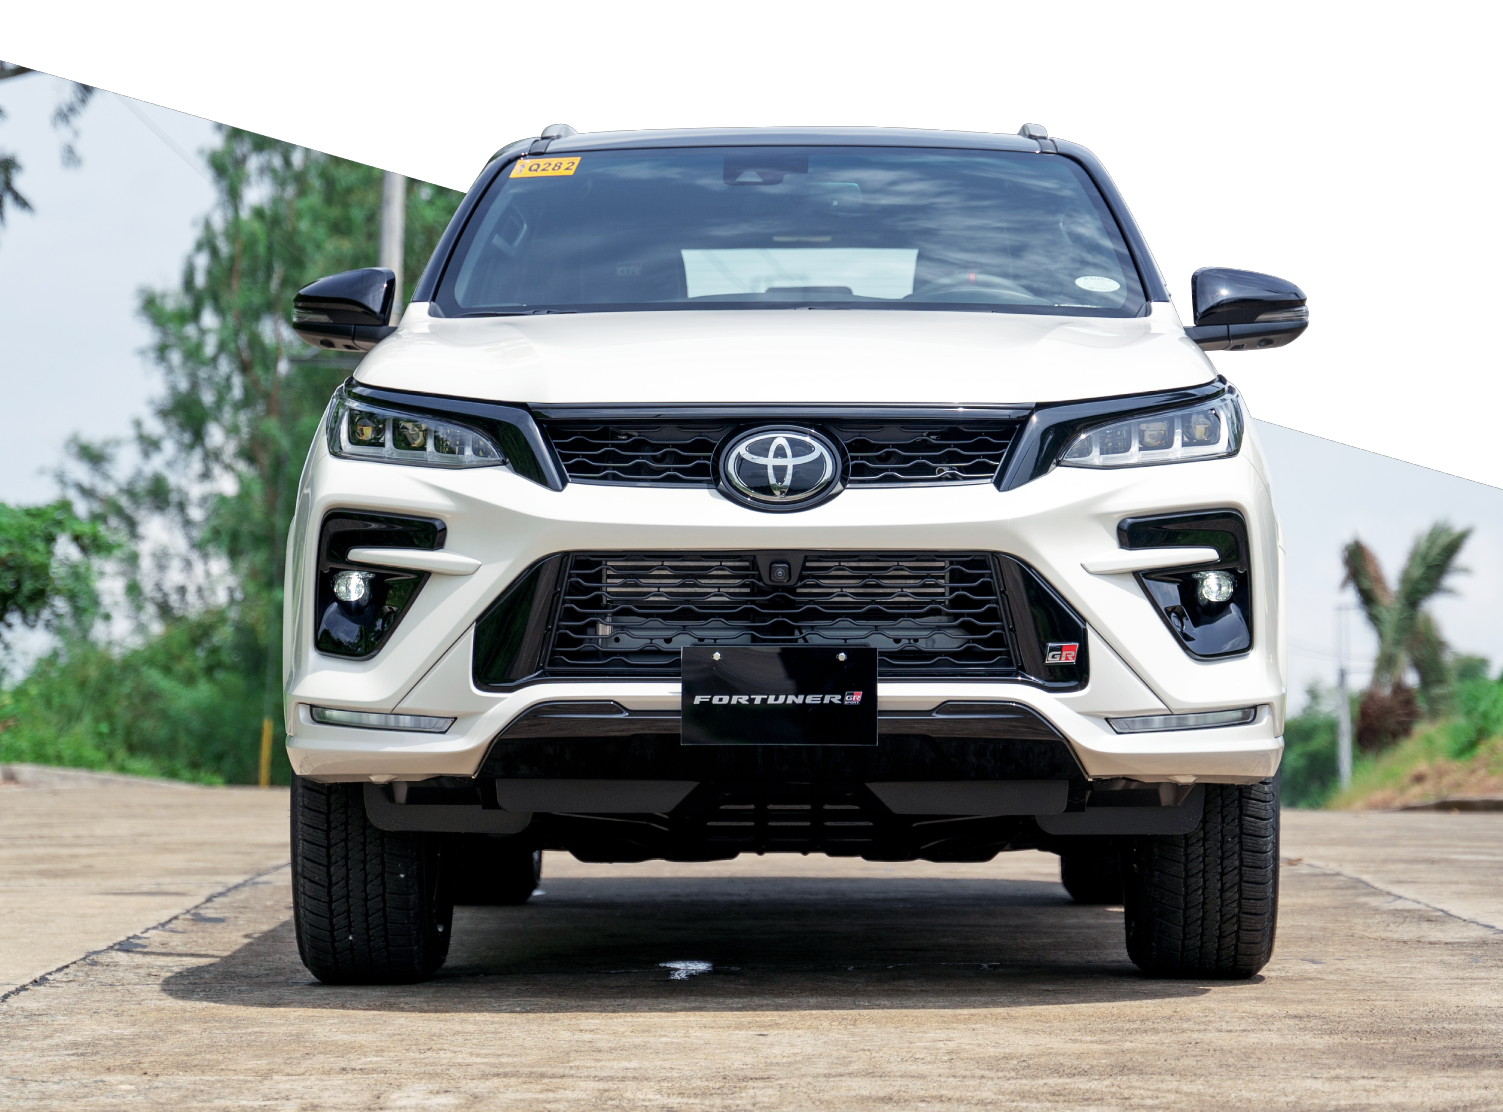 Toyota FORTUNER Pricelist as of July 2022